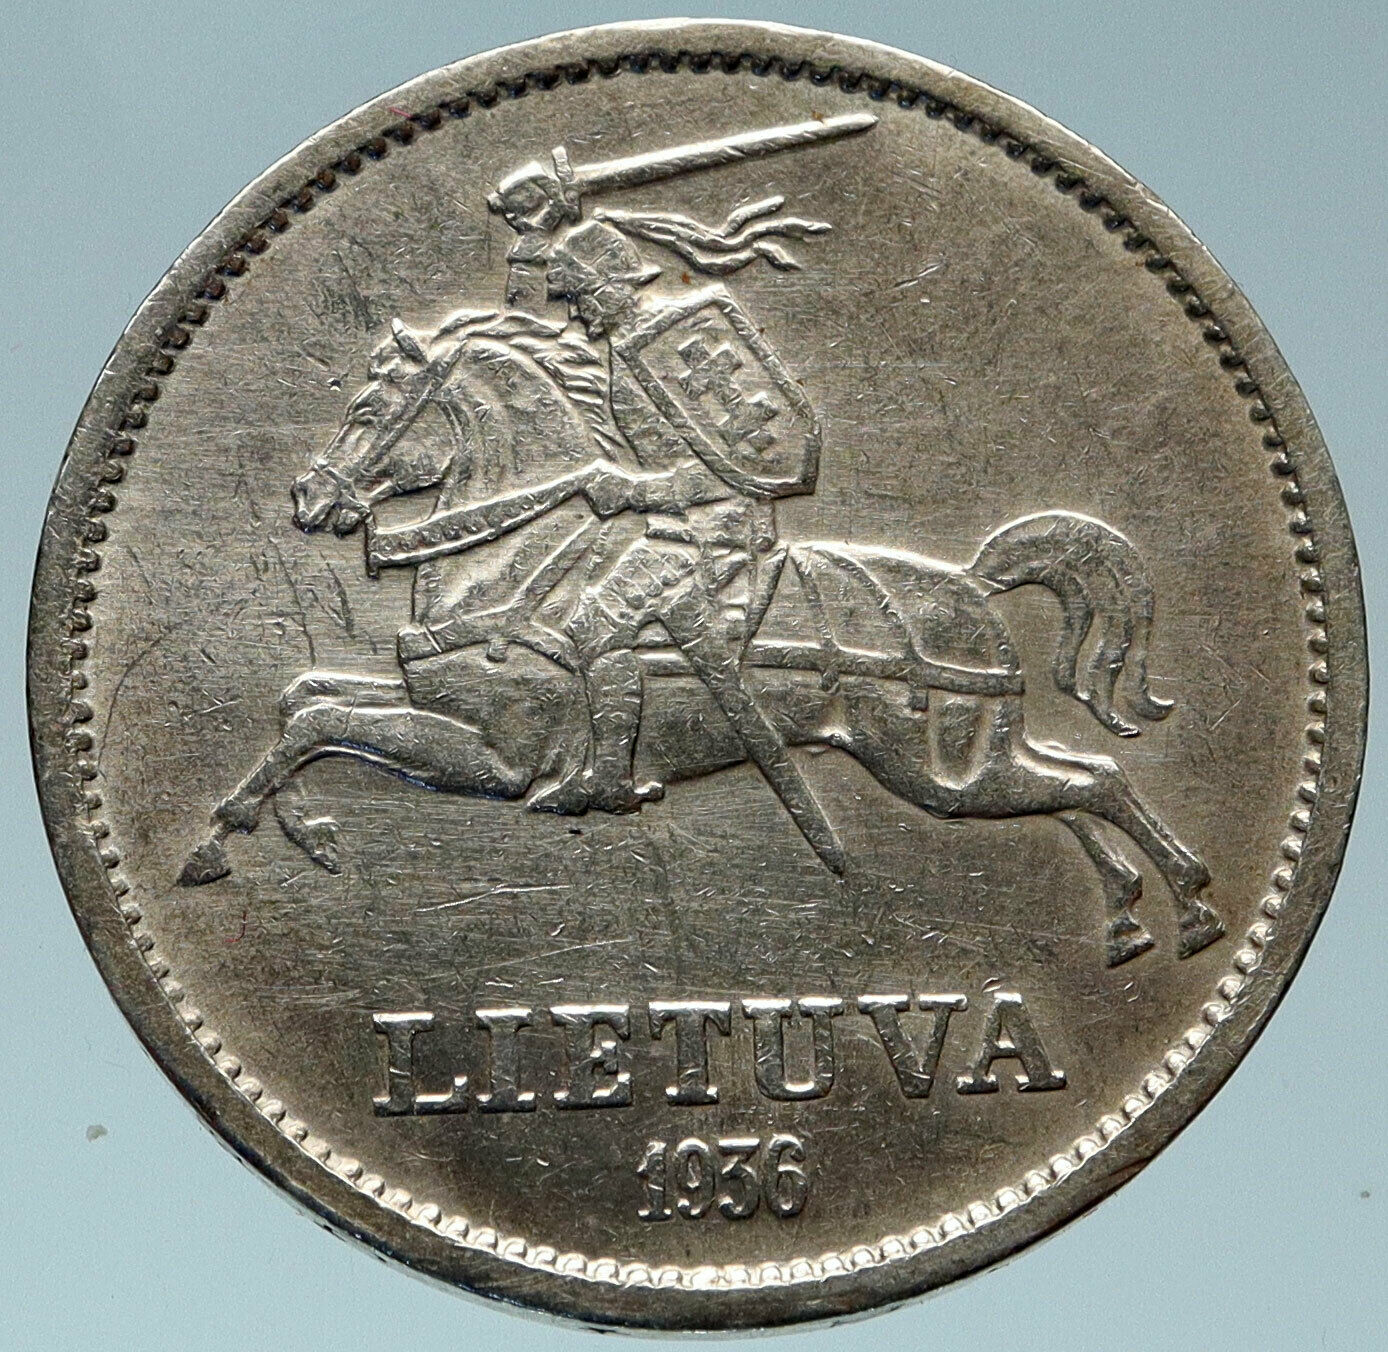 1936 LITHUANIA VYTAUTAS the GREAT Vintage Silver 10 Litai Lithuanian Coin i82933